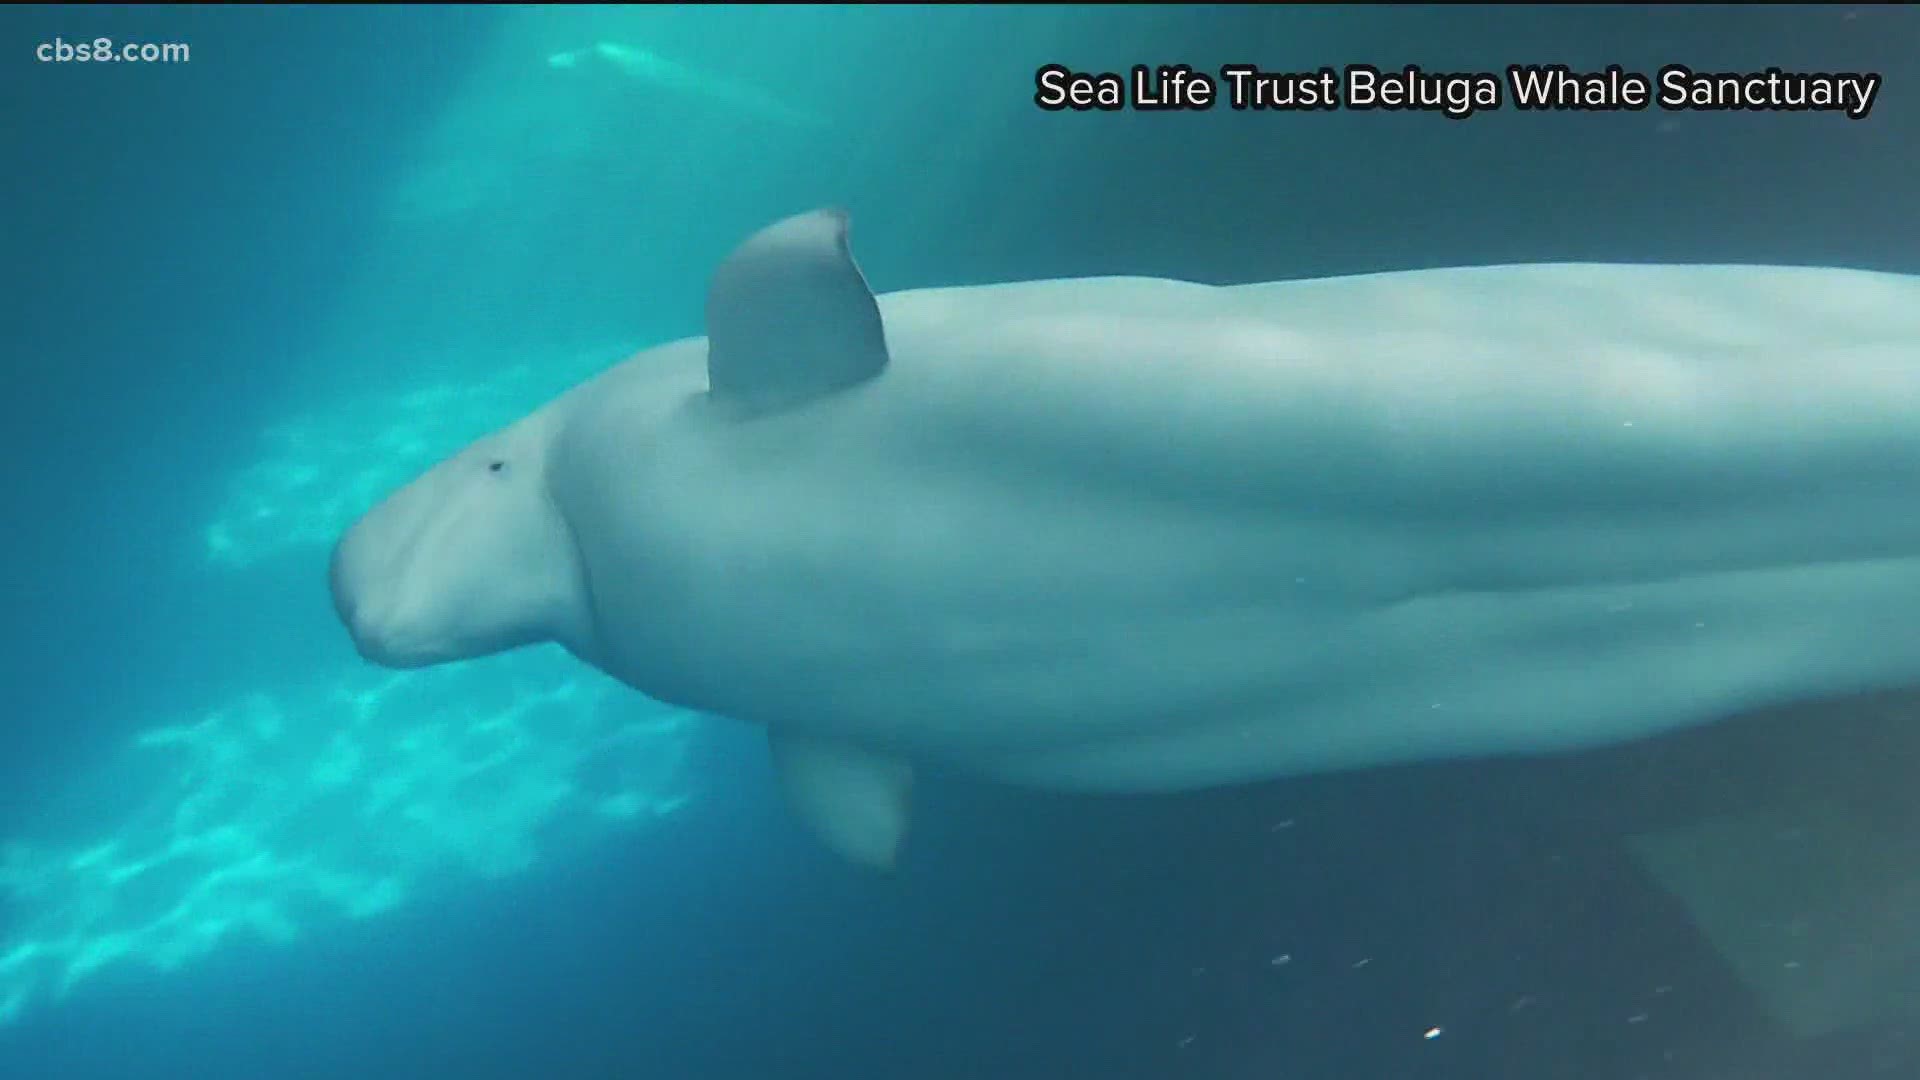 Two beluga whales have spent 11 years in a Chinese aquarium. Now, they're heading to a whale sanctuary.